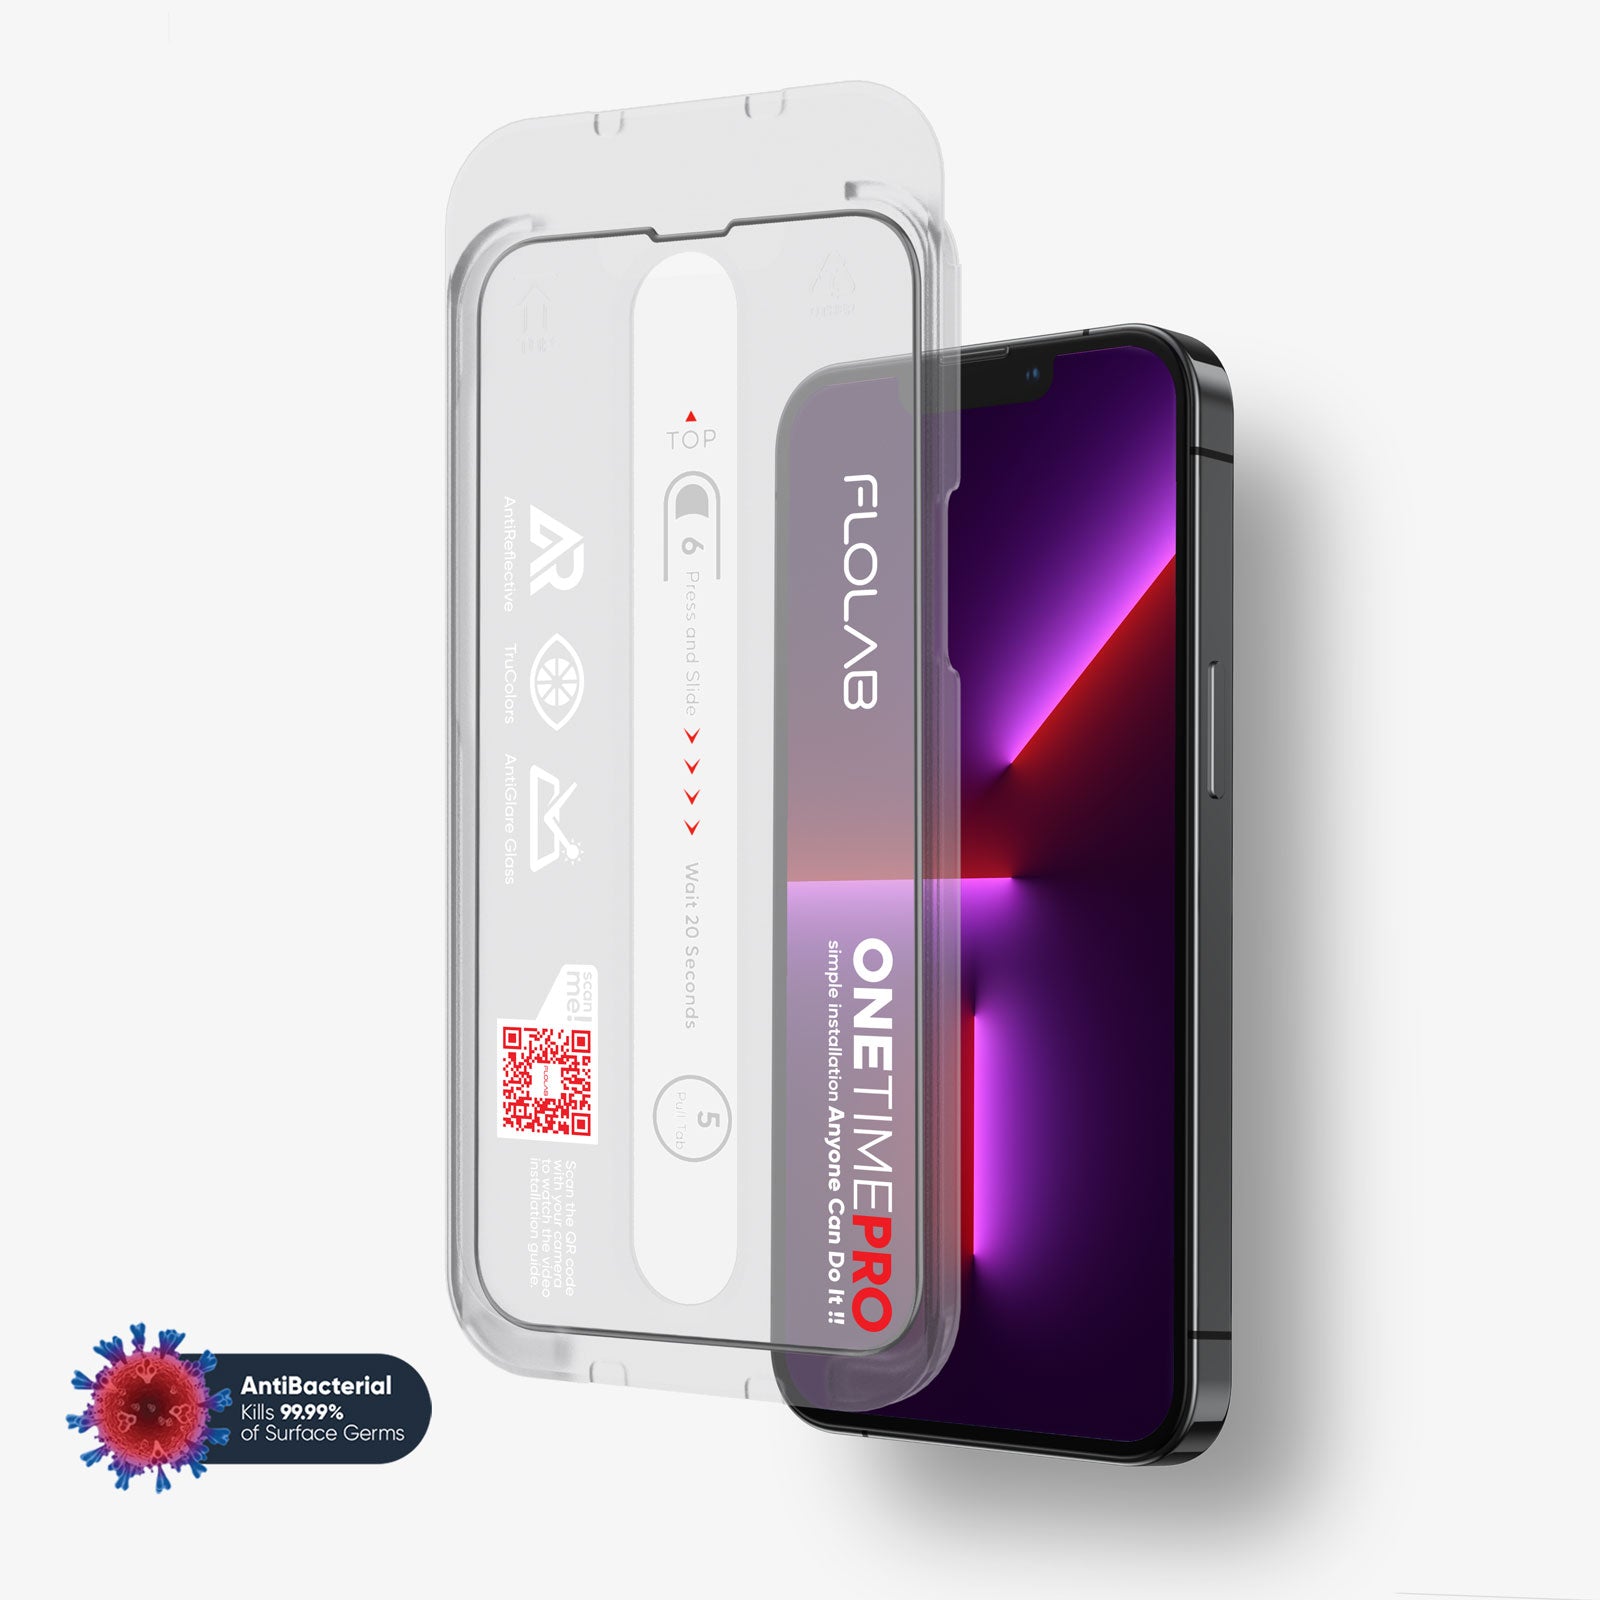 FLOLAB I Best iPhone 11 Pro Screen Protector